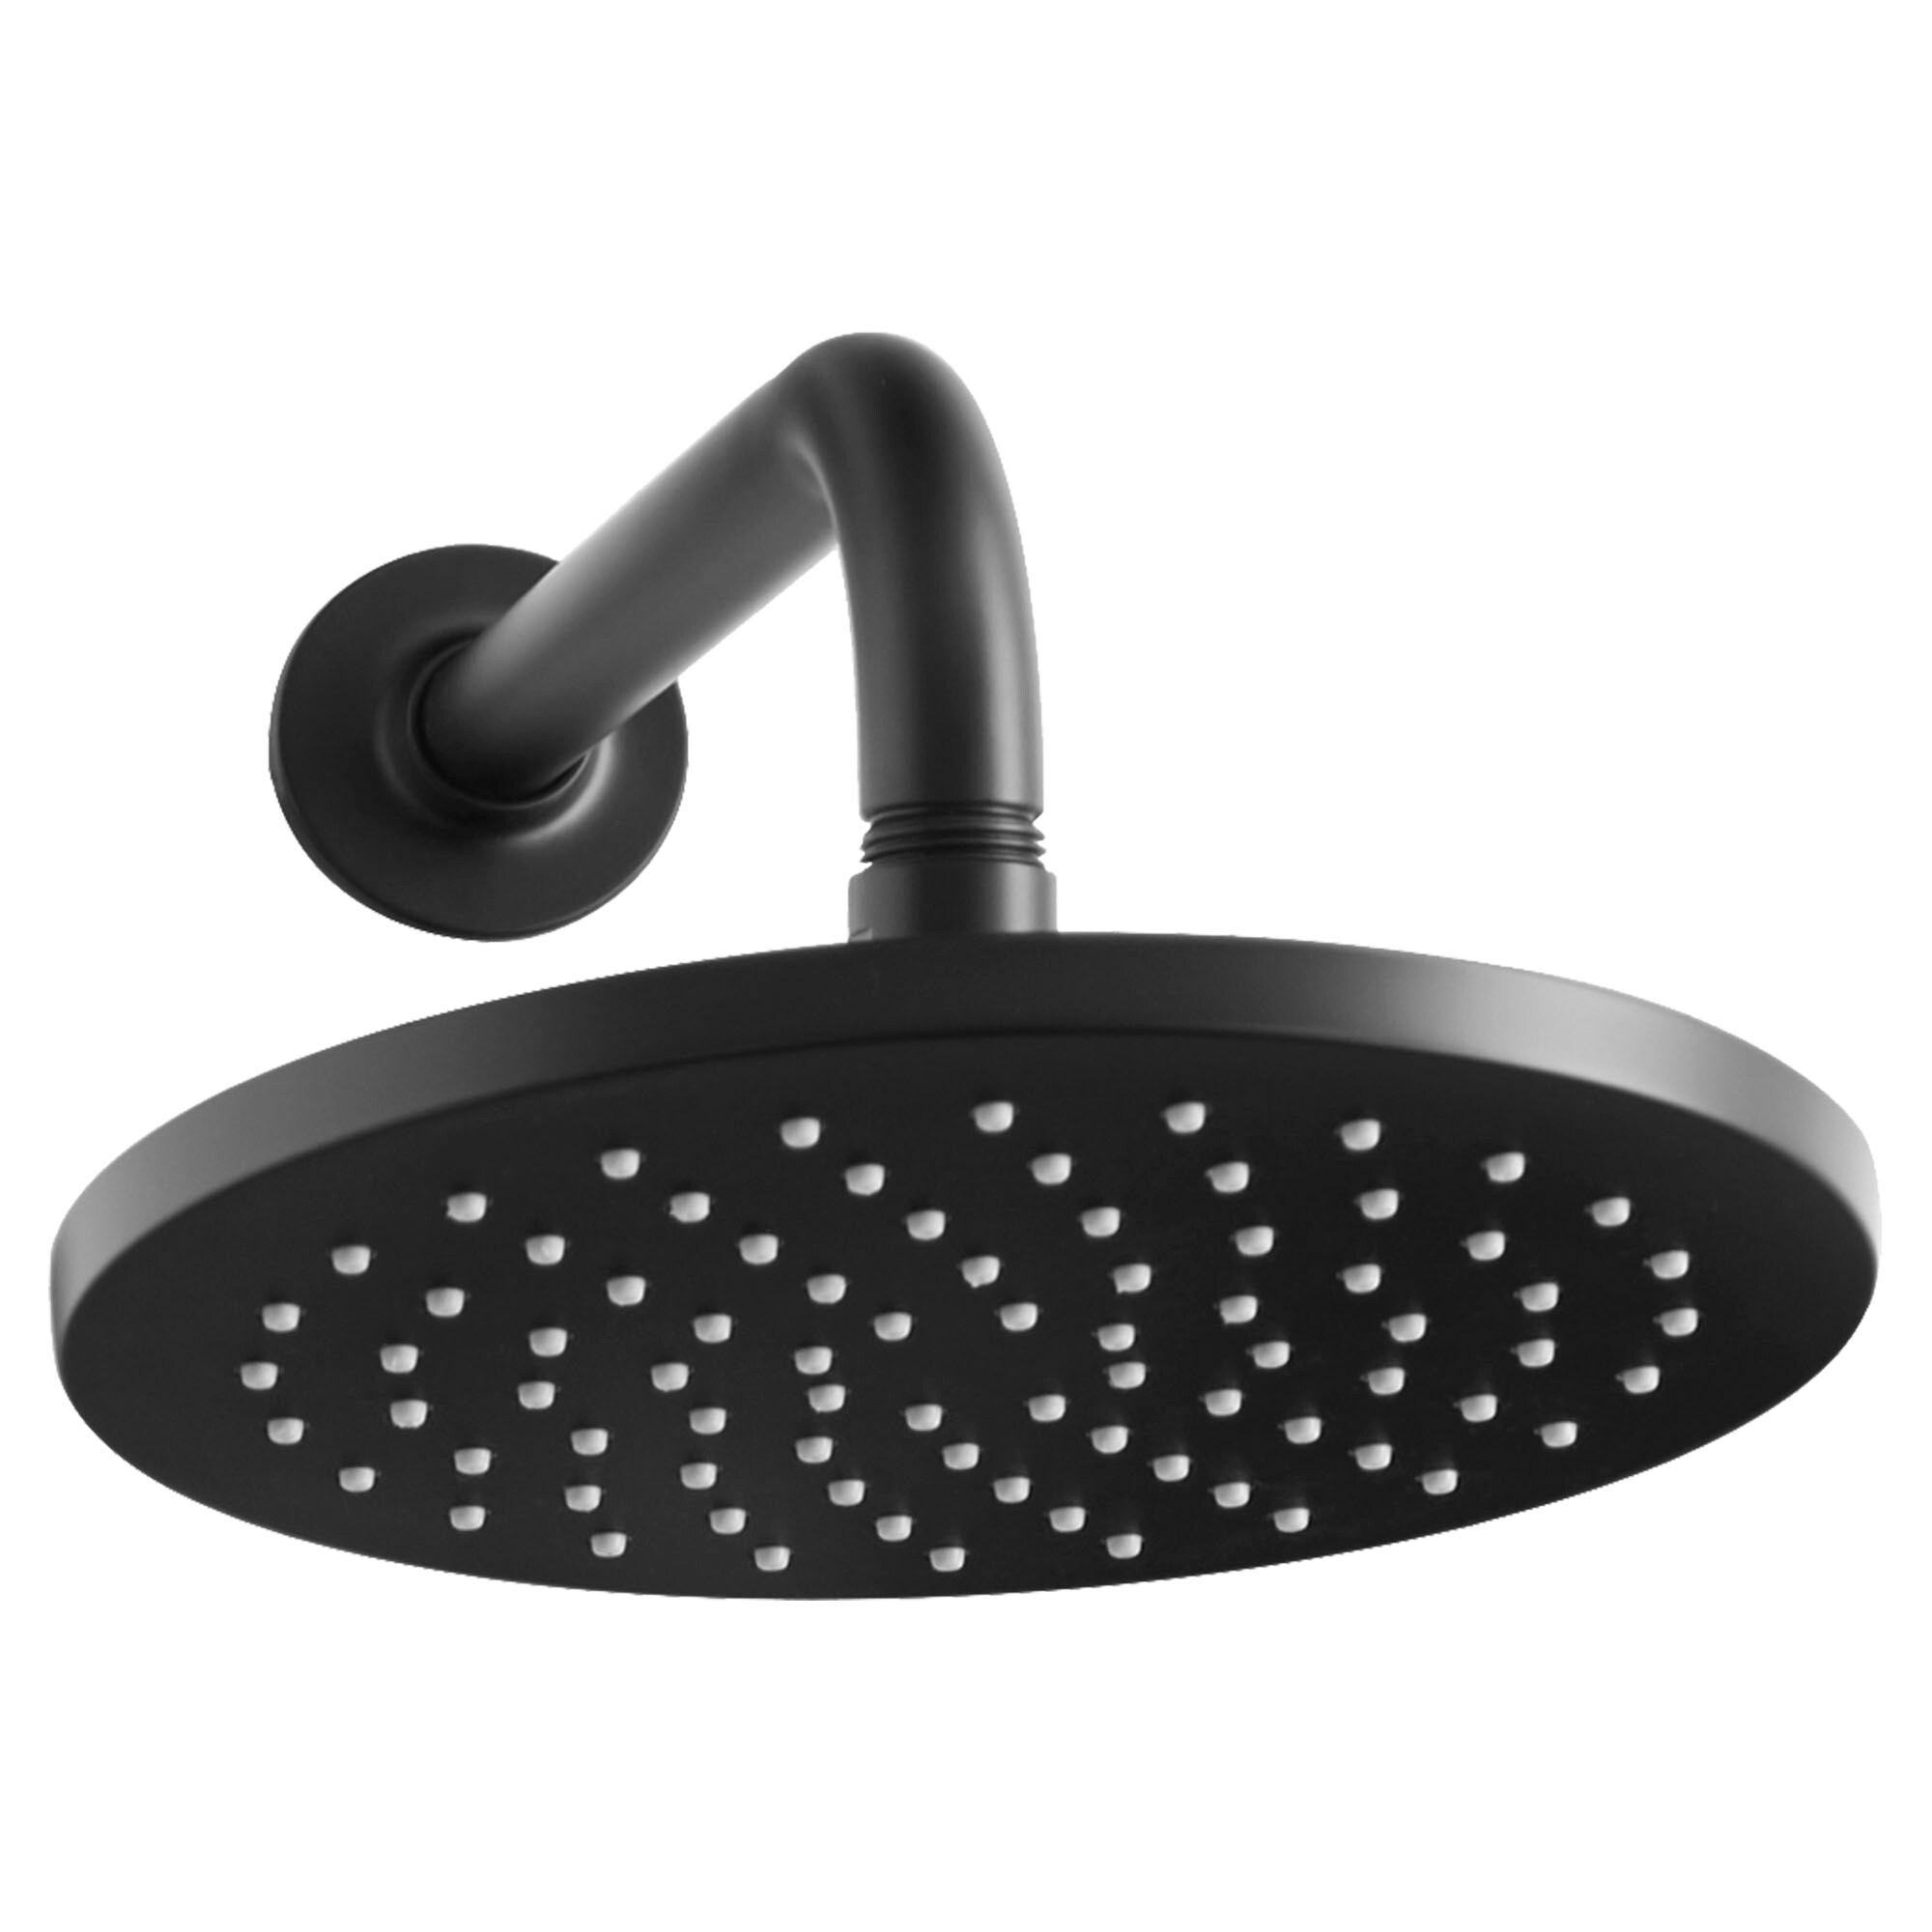 American Standard Shower Heads Near Me at Lowes.com